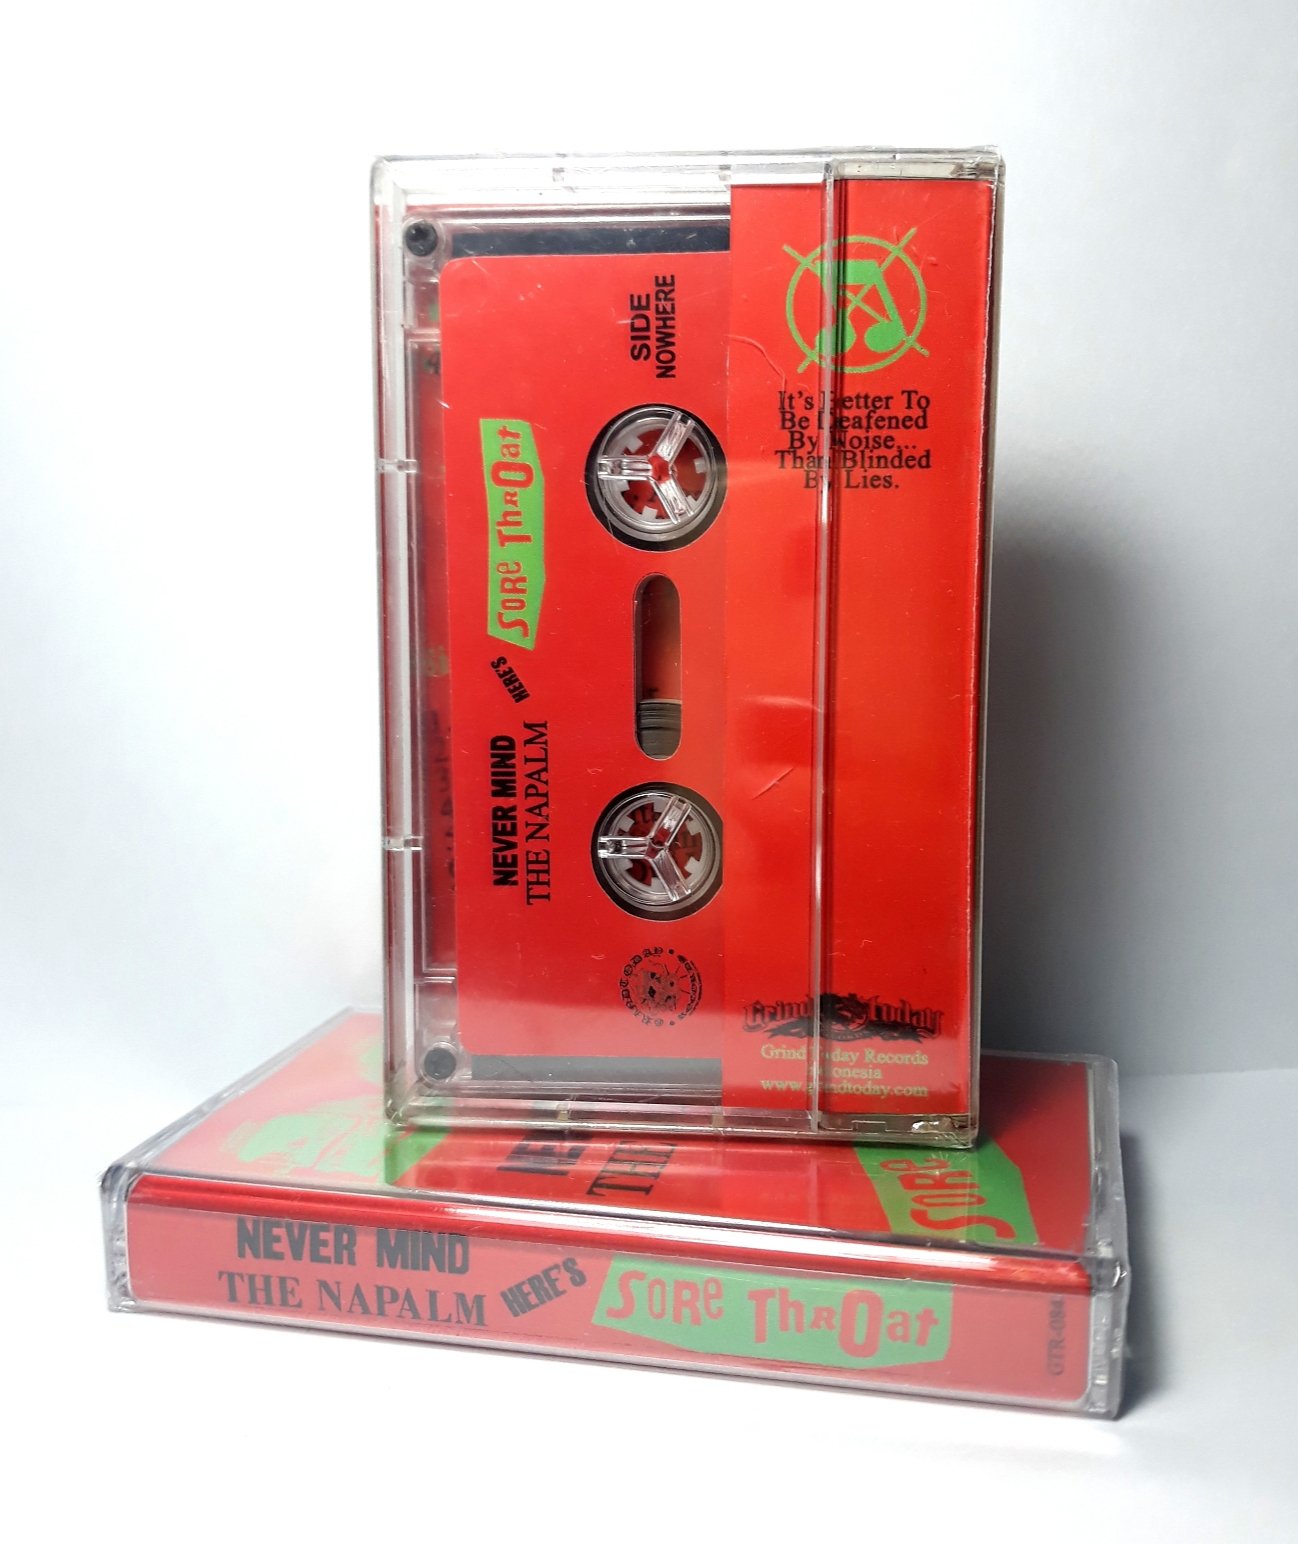 Image of Sore Throat – "Never Mind The Napalm Here's Sore Throat" cassette